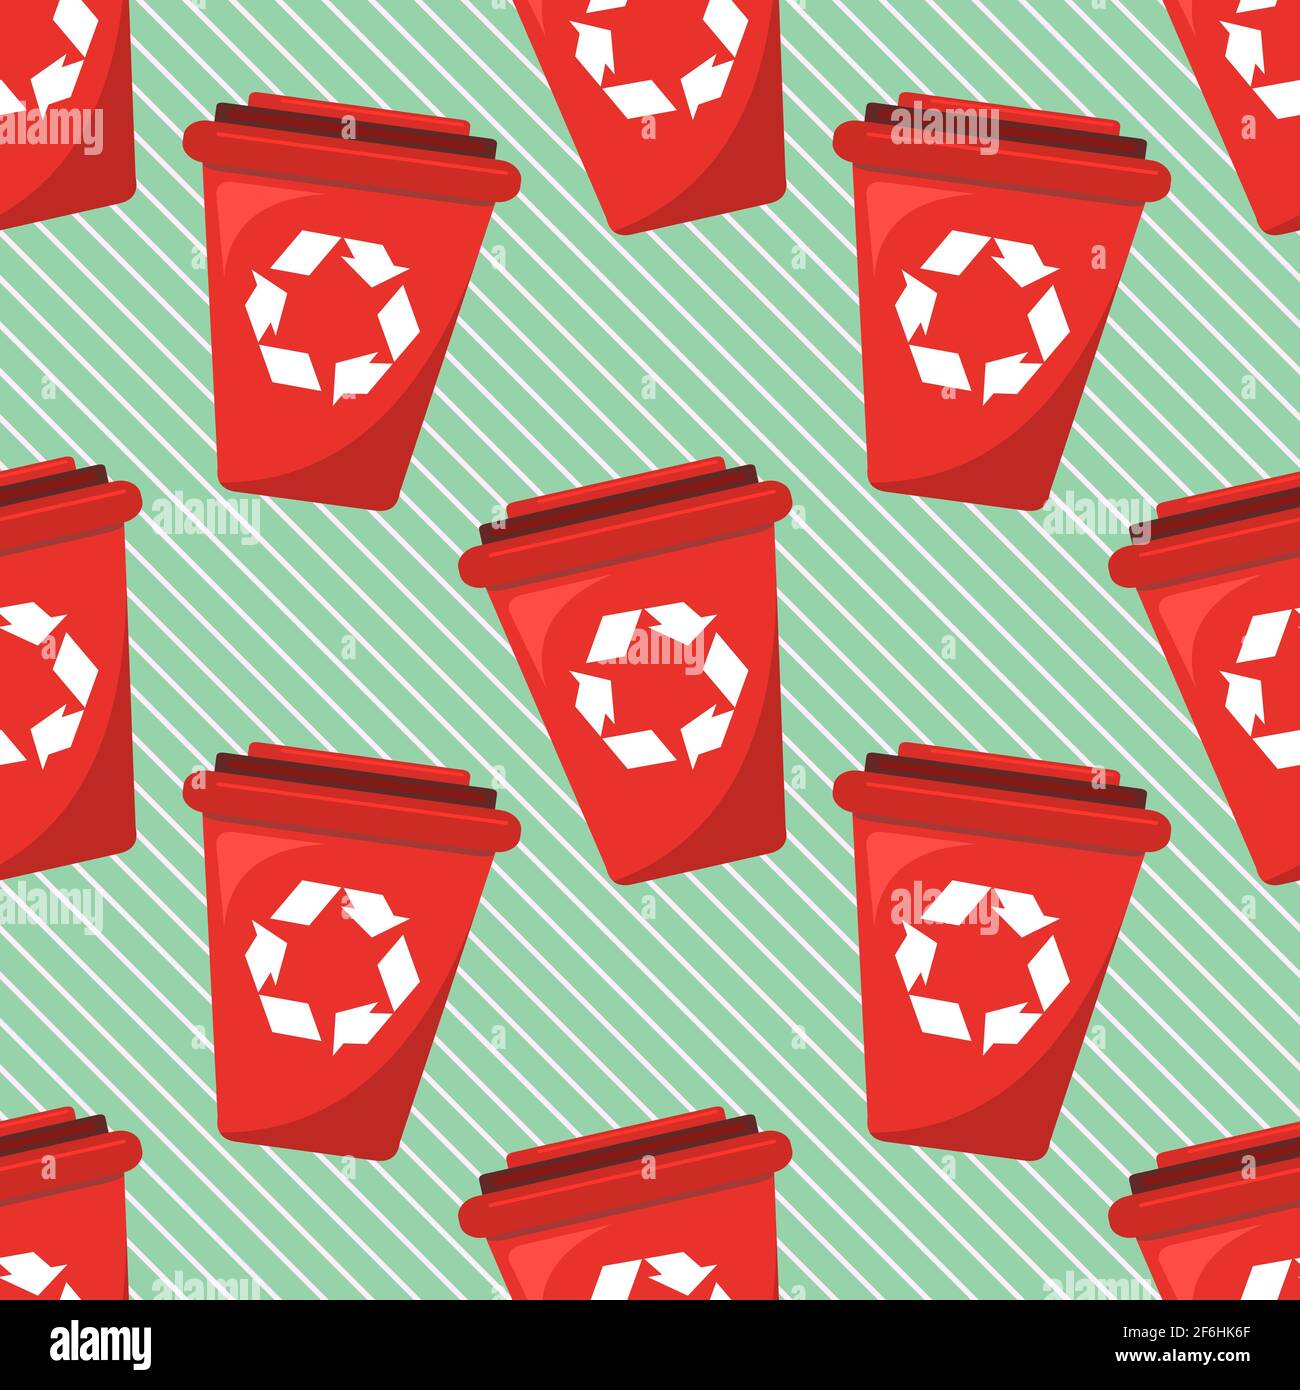 red trash can seamless pattern vector illustration Stock Vector